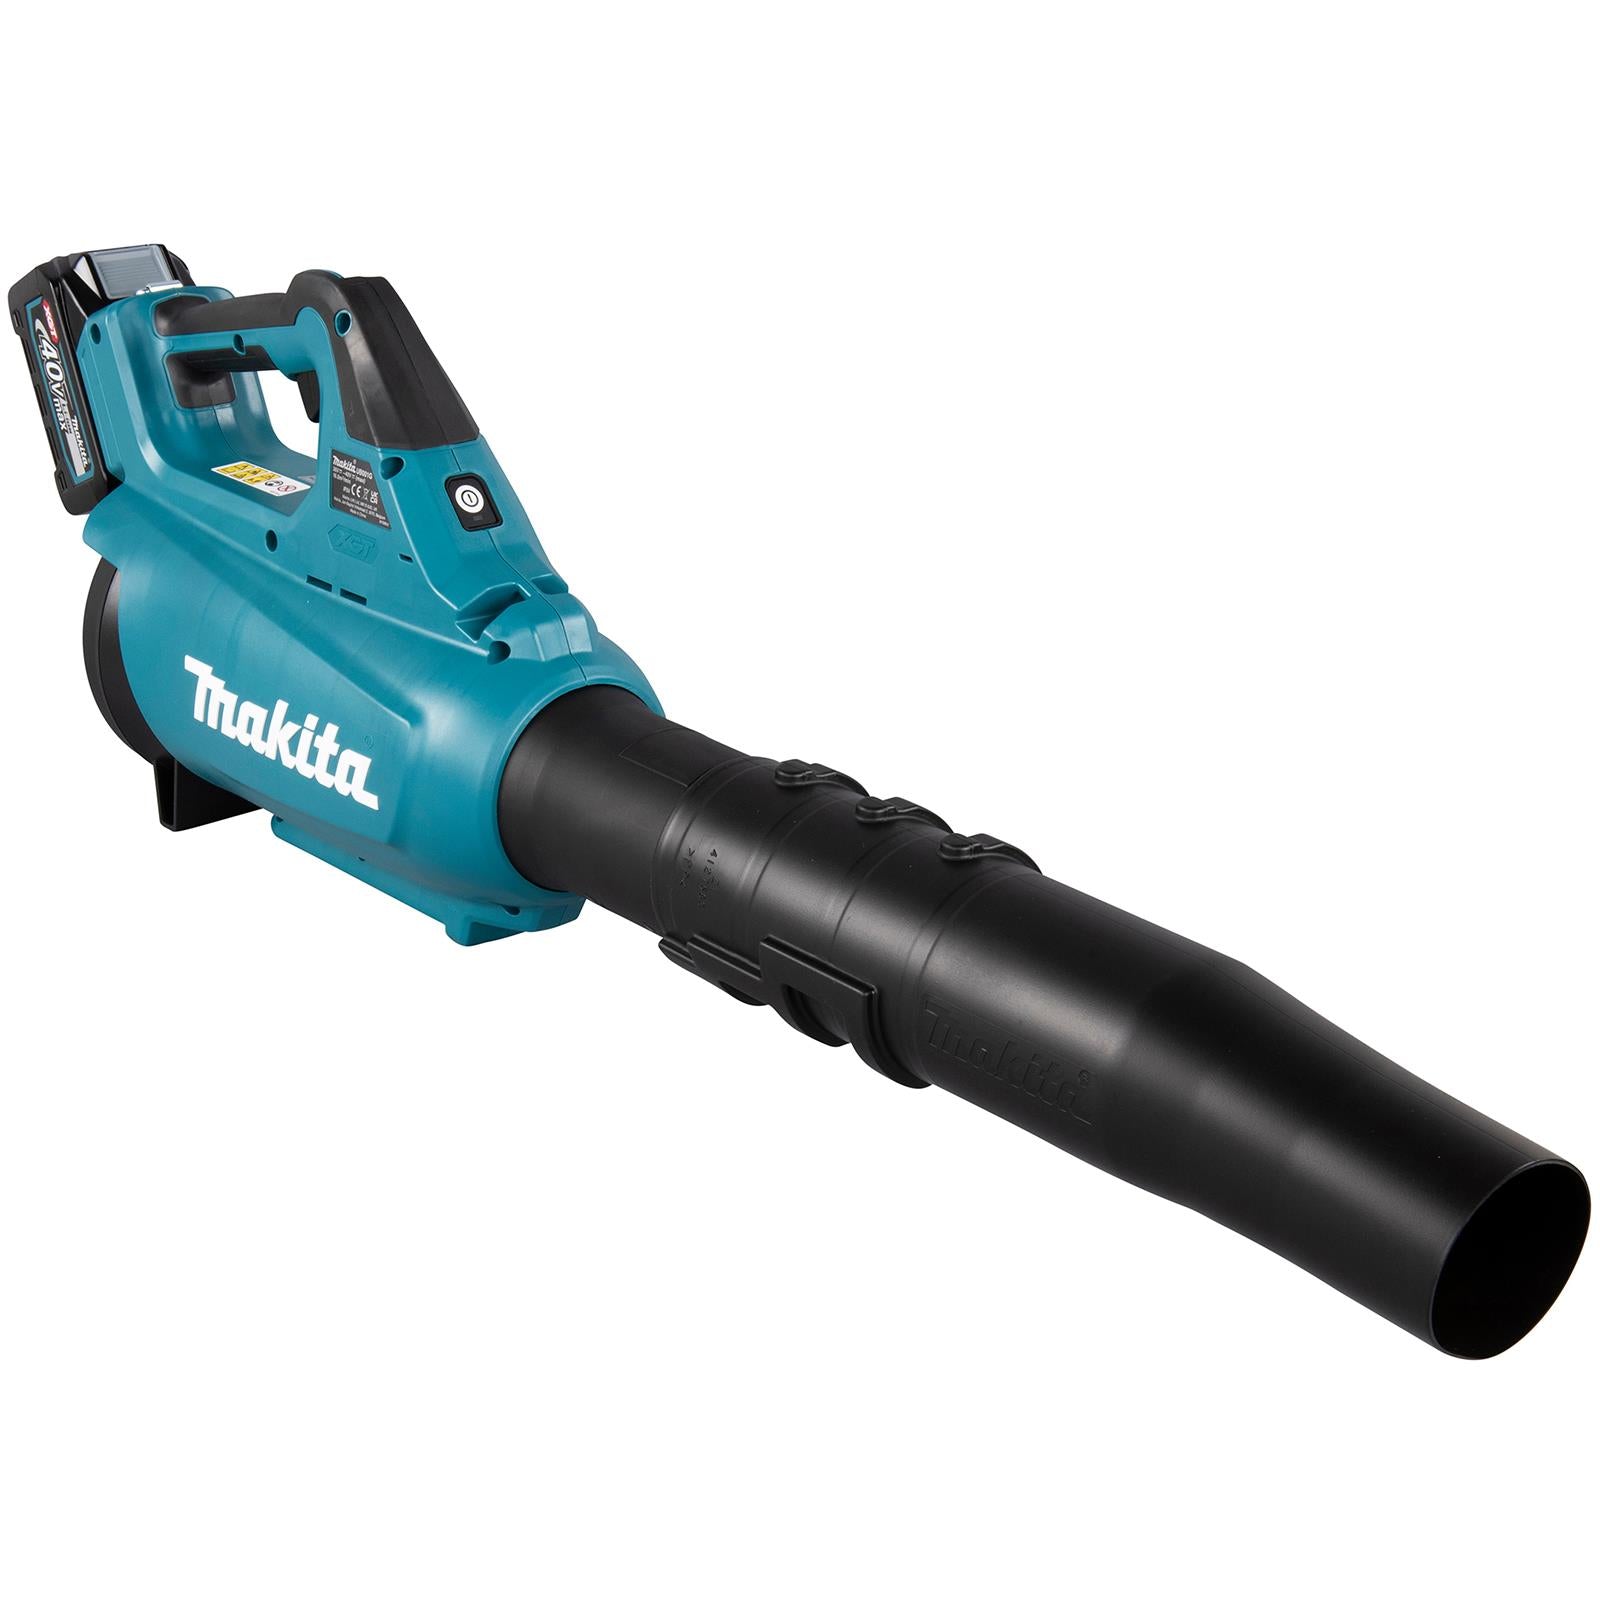 Makita Leaf Blower 40V XGT Brushless Cordless 2 x 2.5Ah Battery and Rapid Charger 17N Garden Grass Clippings Construction UB001GD202